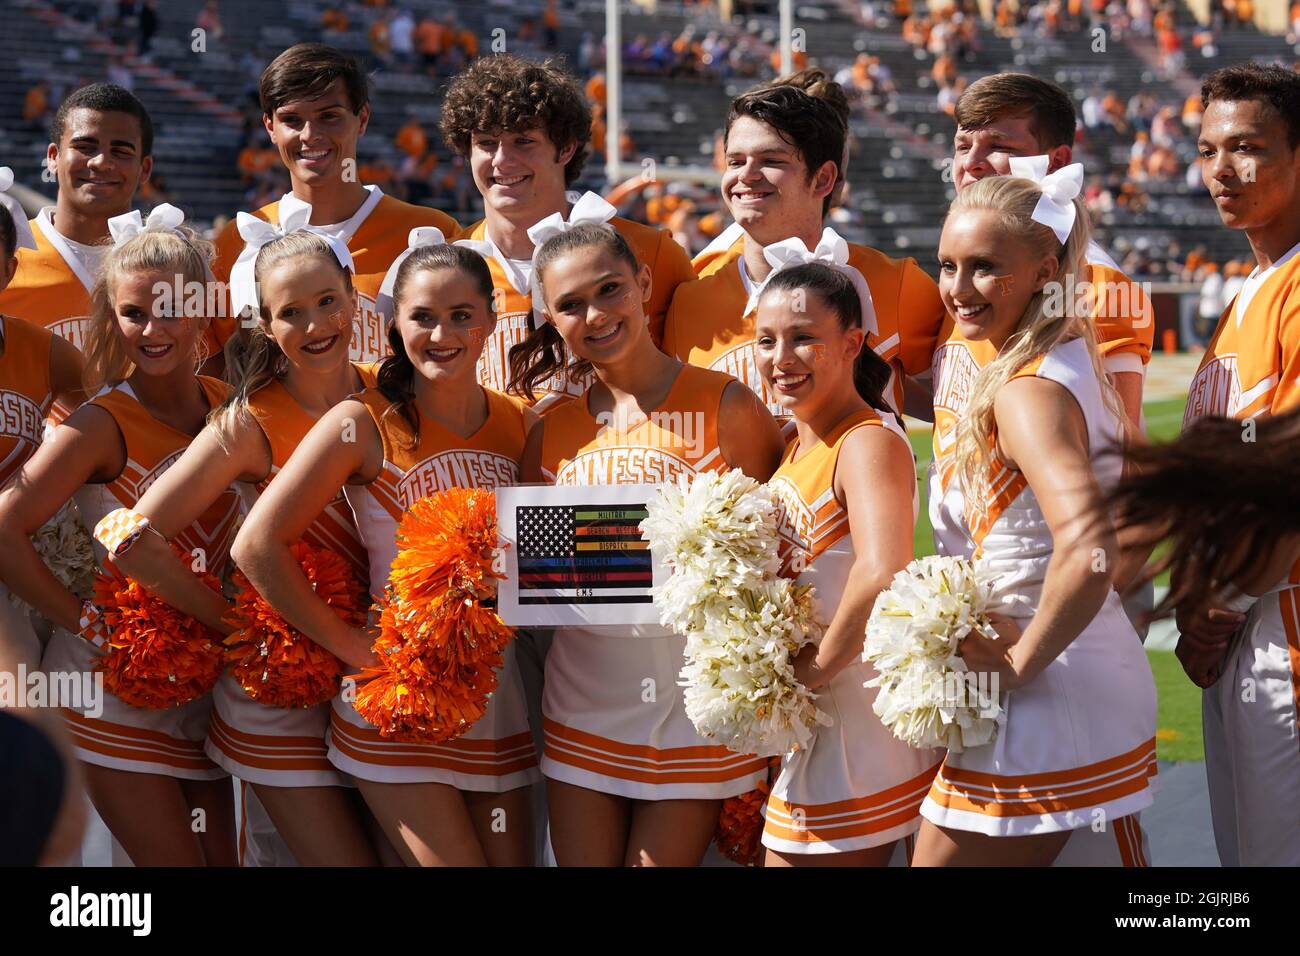 September 11, 2021: Tennessee Volunteers cheerleaders before the NCAA football game between the University of Tennessee Volunteers and the University of Pittsburgh Panthers at Neyland Stadium in Knoxville TN Tim Gangloff/CSM Stock Photo